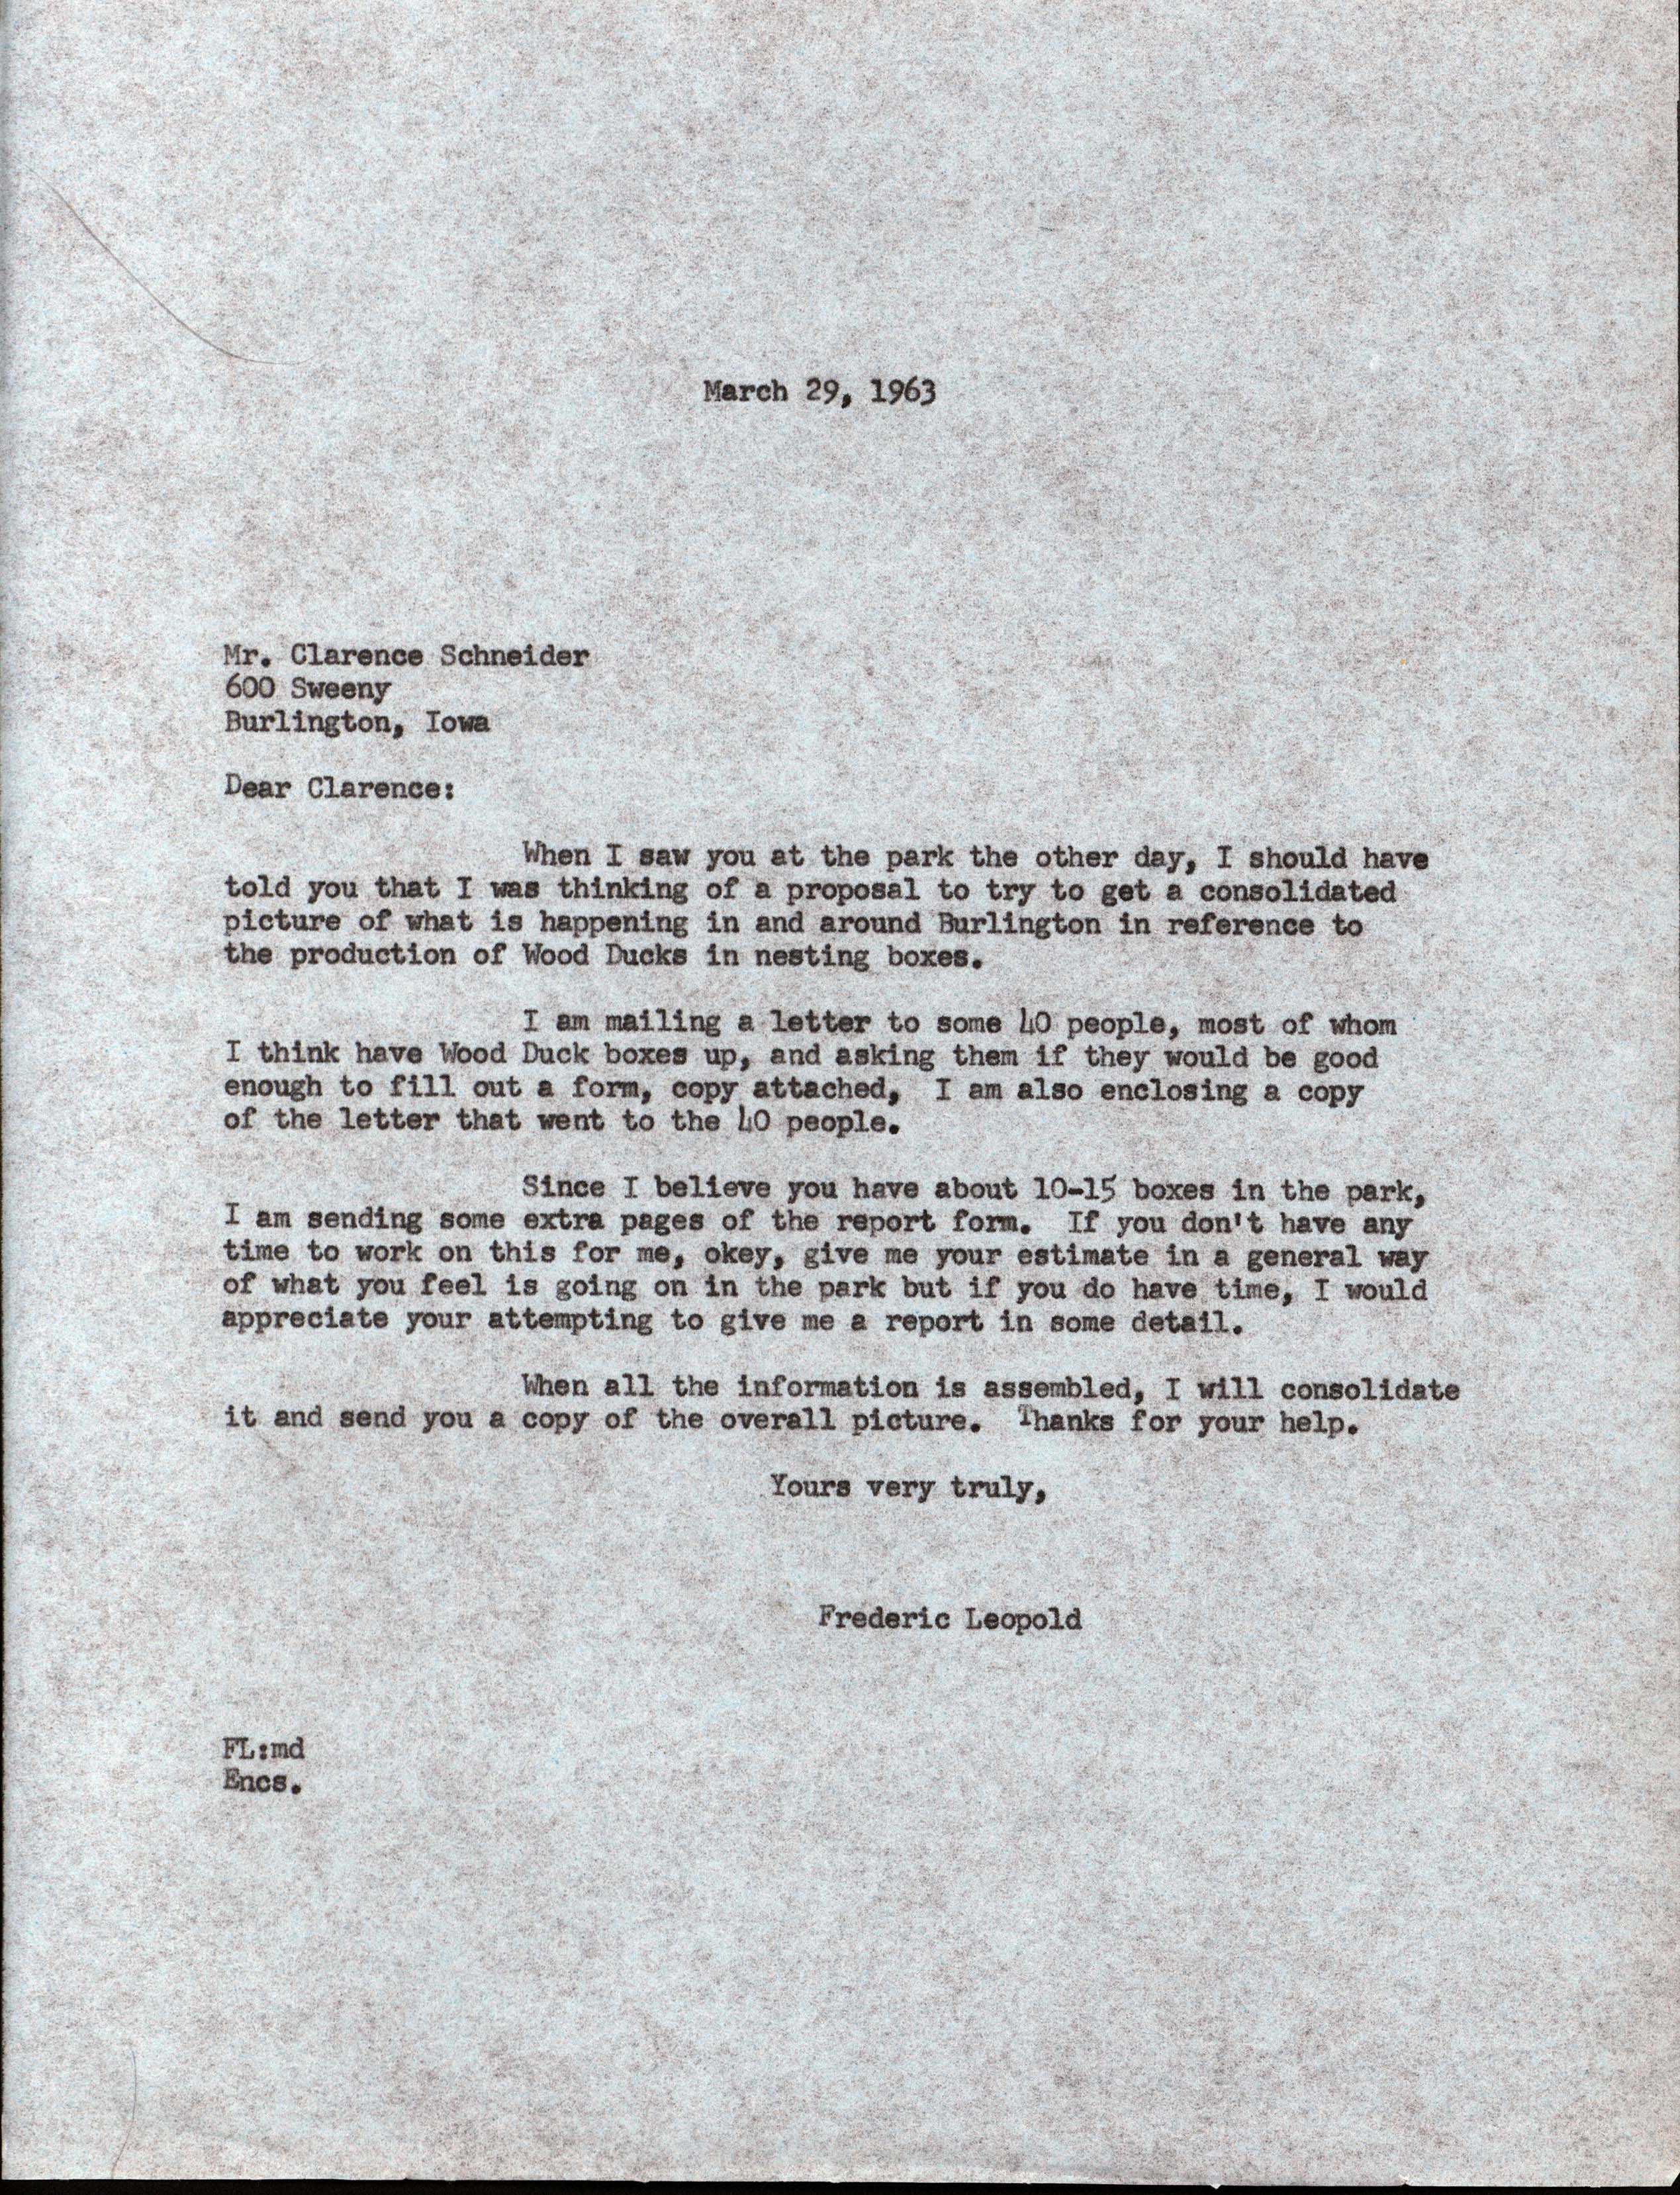 Frederic Leopold letter to Clarence Schneider regarding a Wood Duck study, March 29, 1963